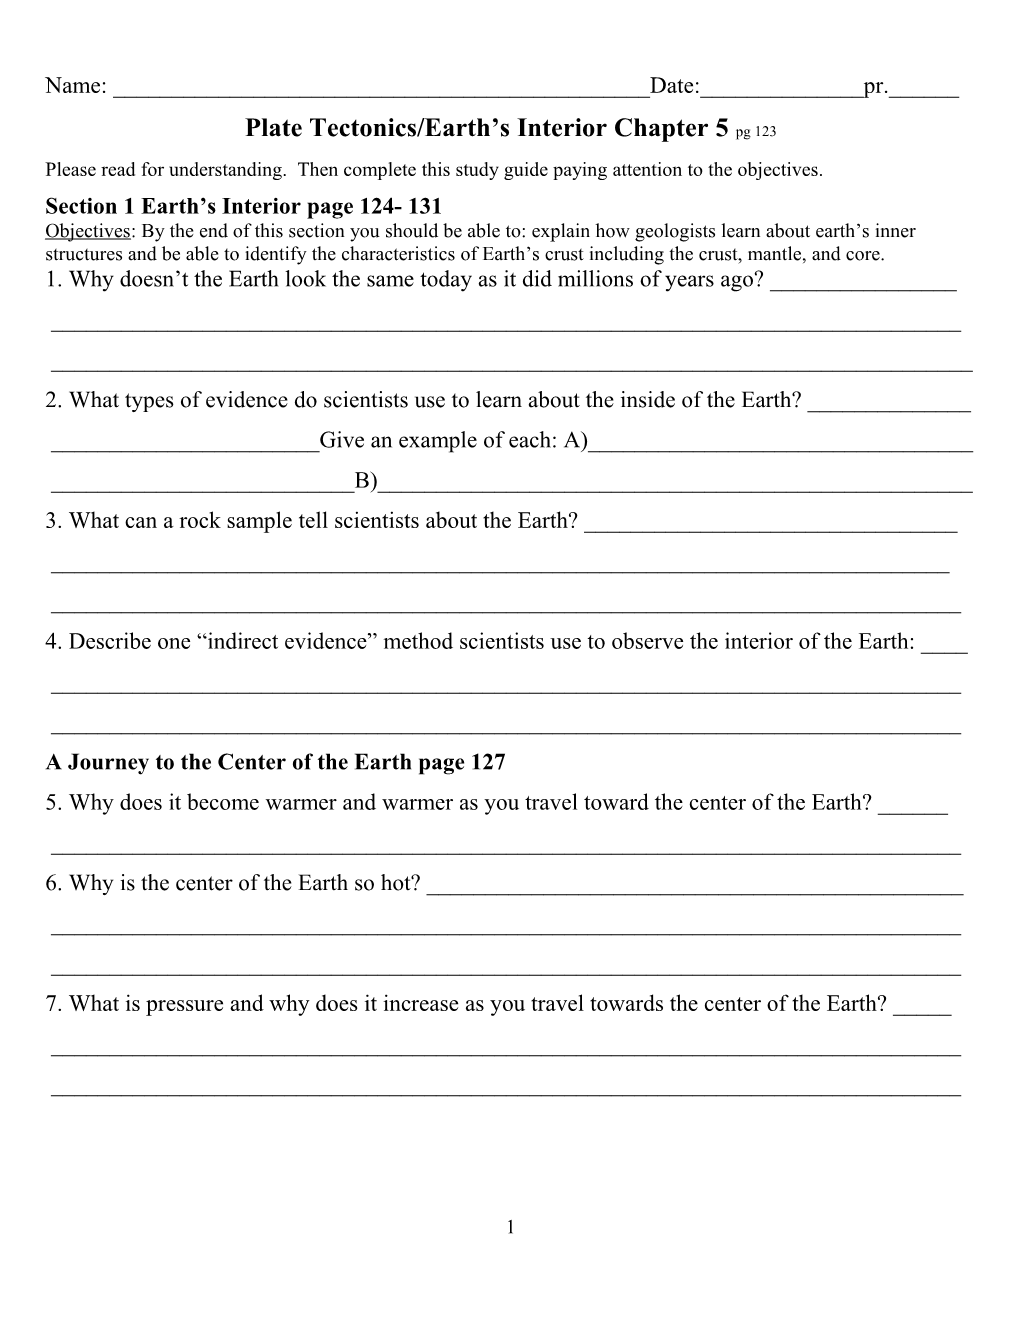 Plate Tectonics/Earth S Interior Chapter 5 Pg 123